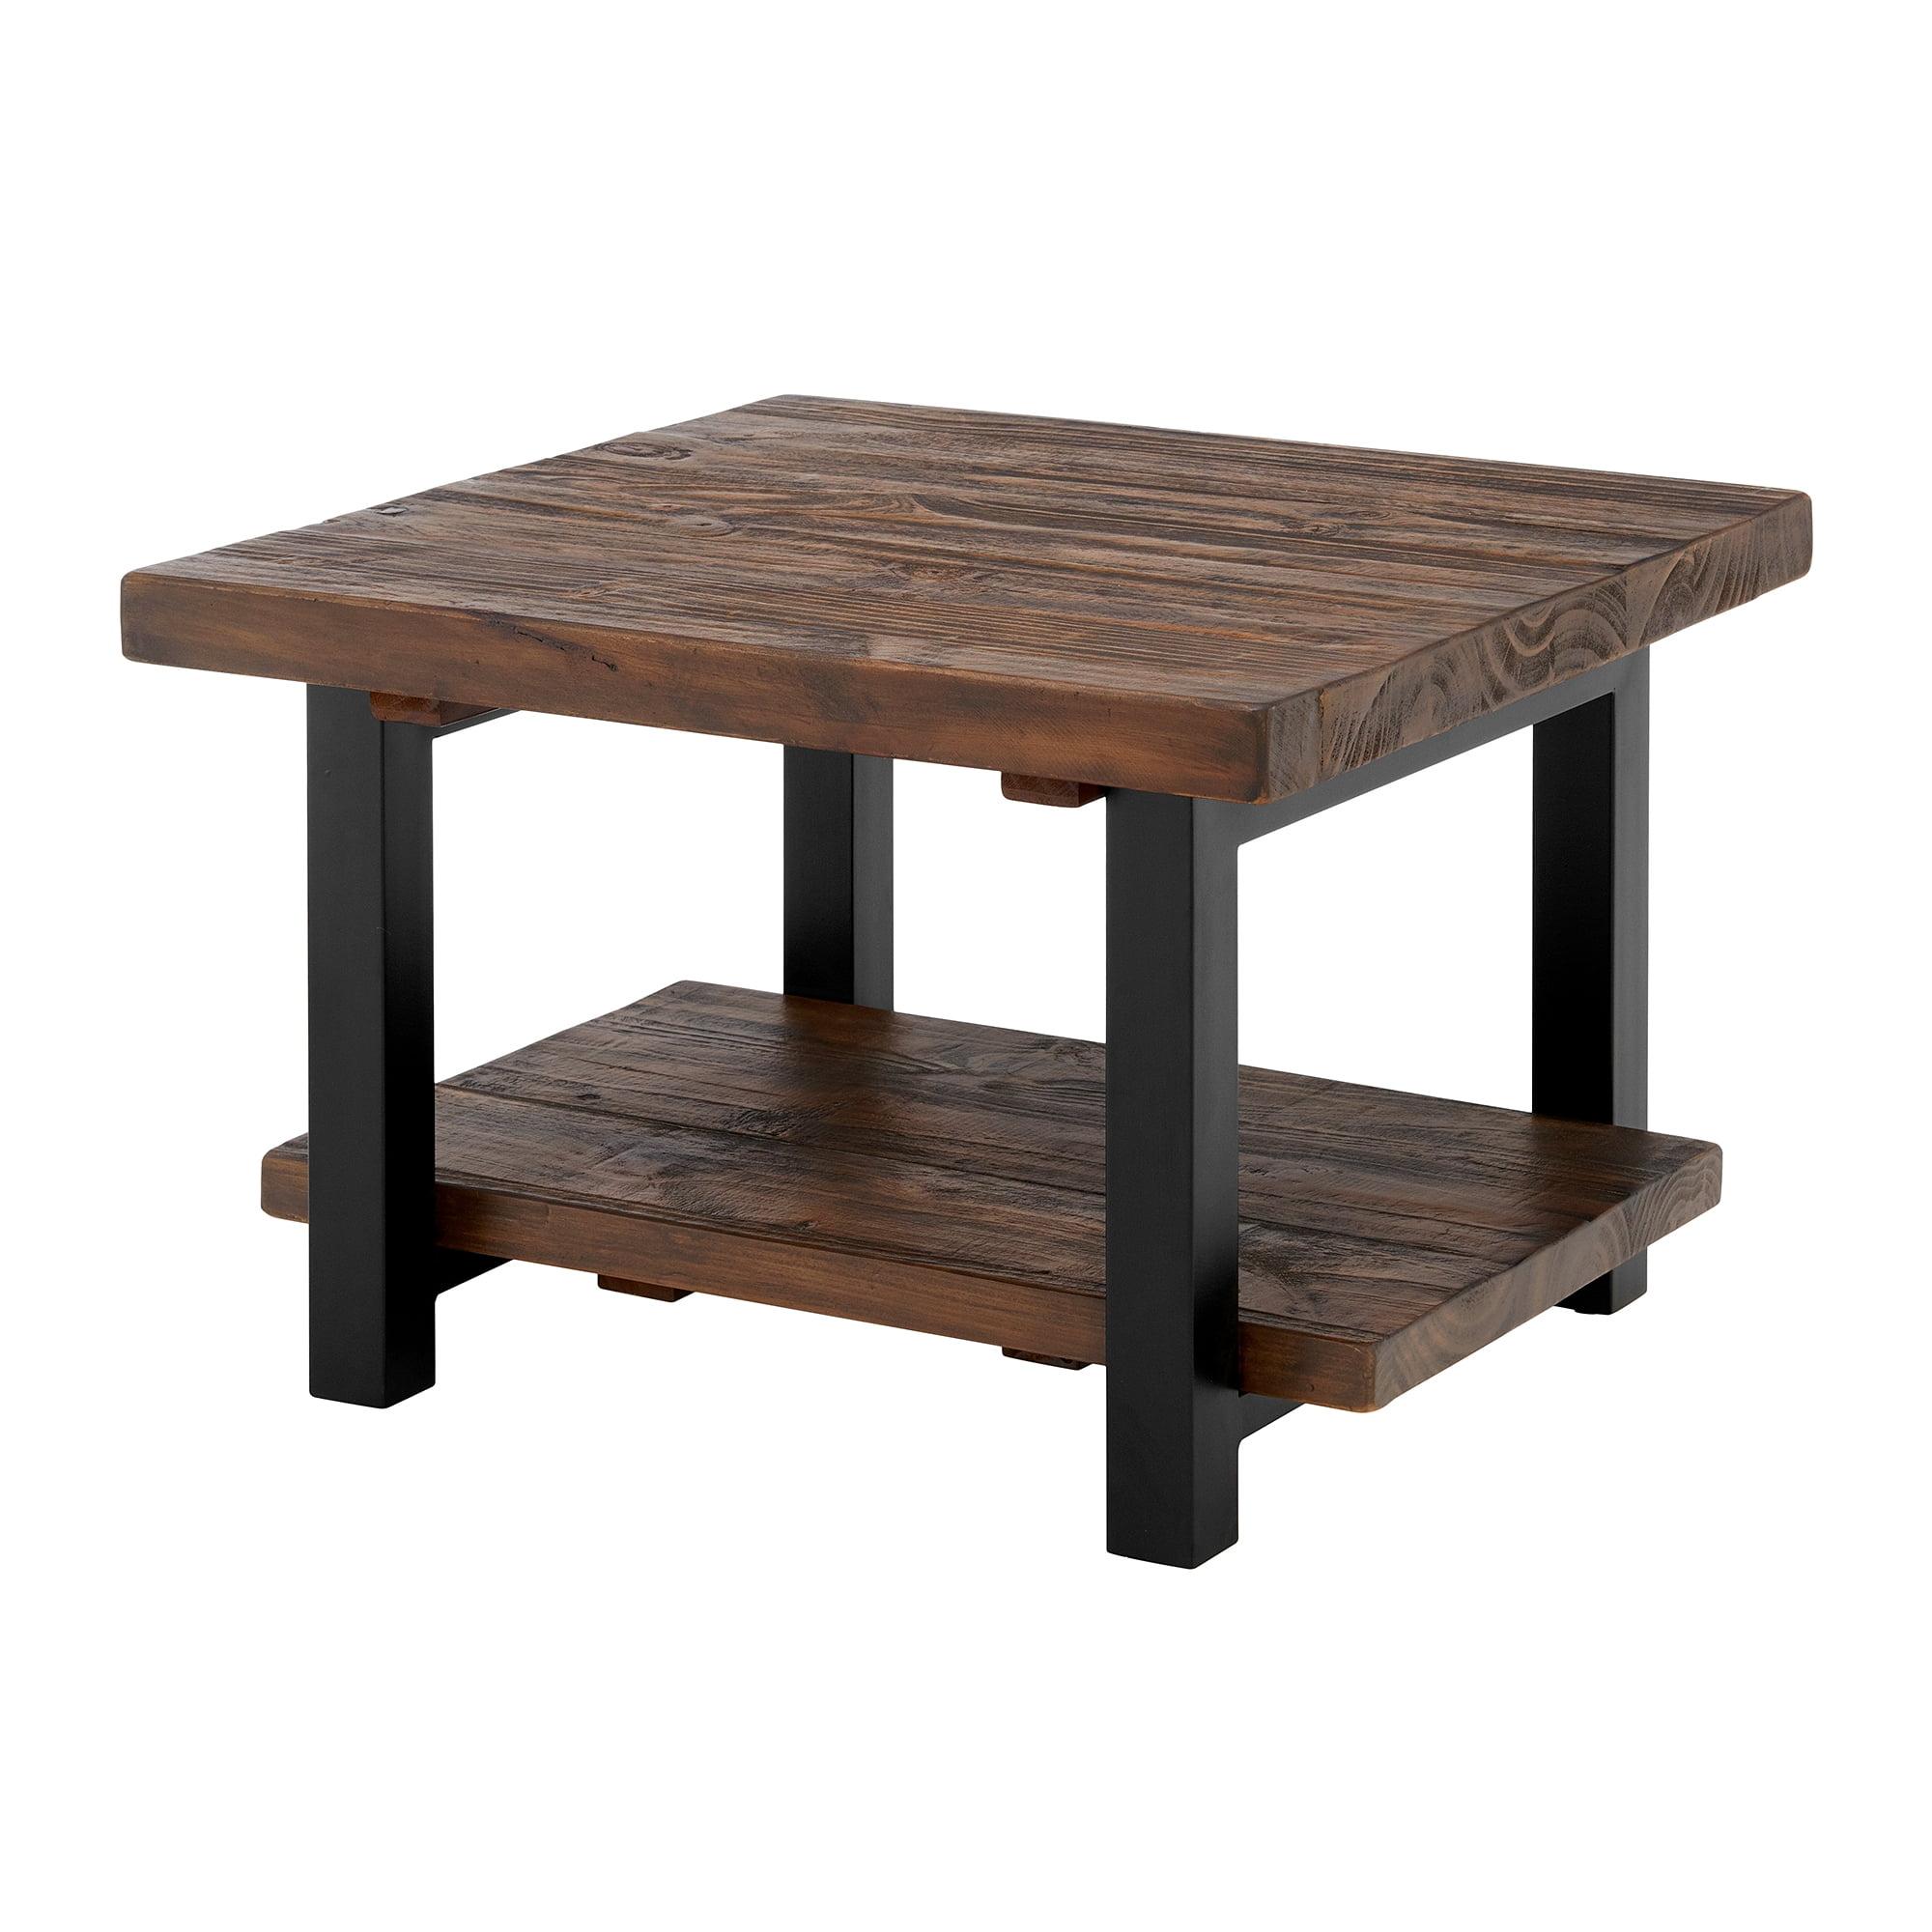 Pomona 31" Rustic Natural Wood and Metal Square Coffee Table with Storage